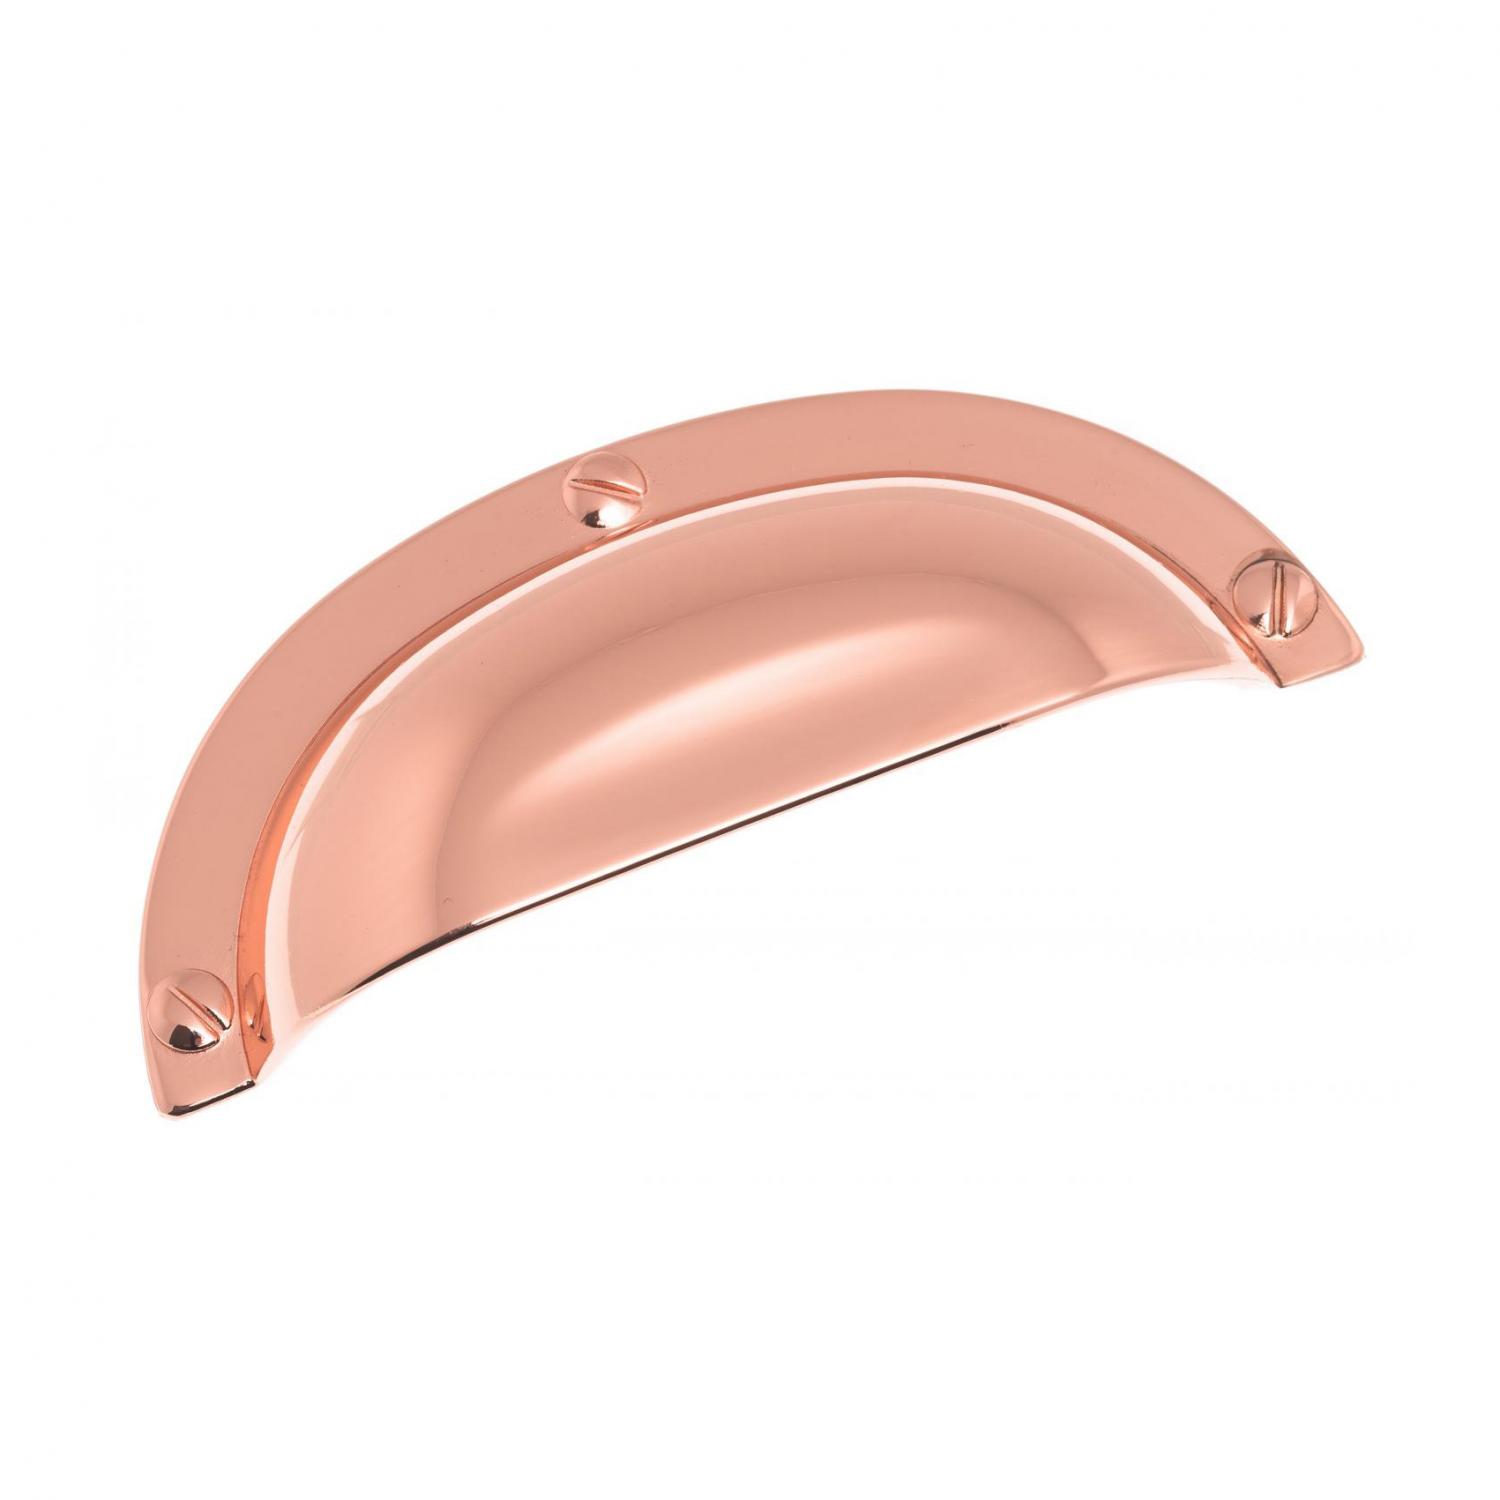 Cup handle 3158 Copper Traditional design